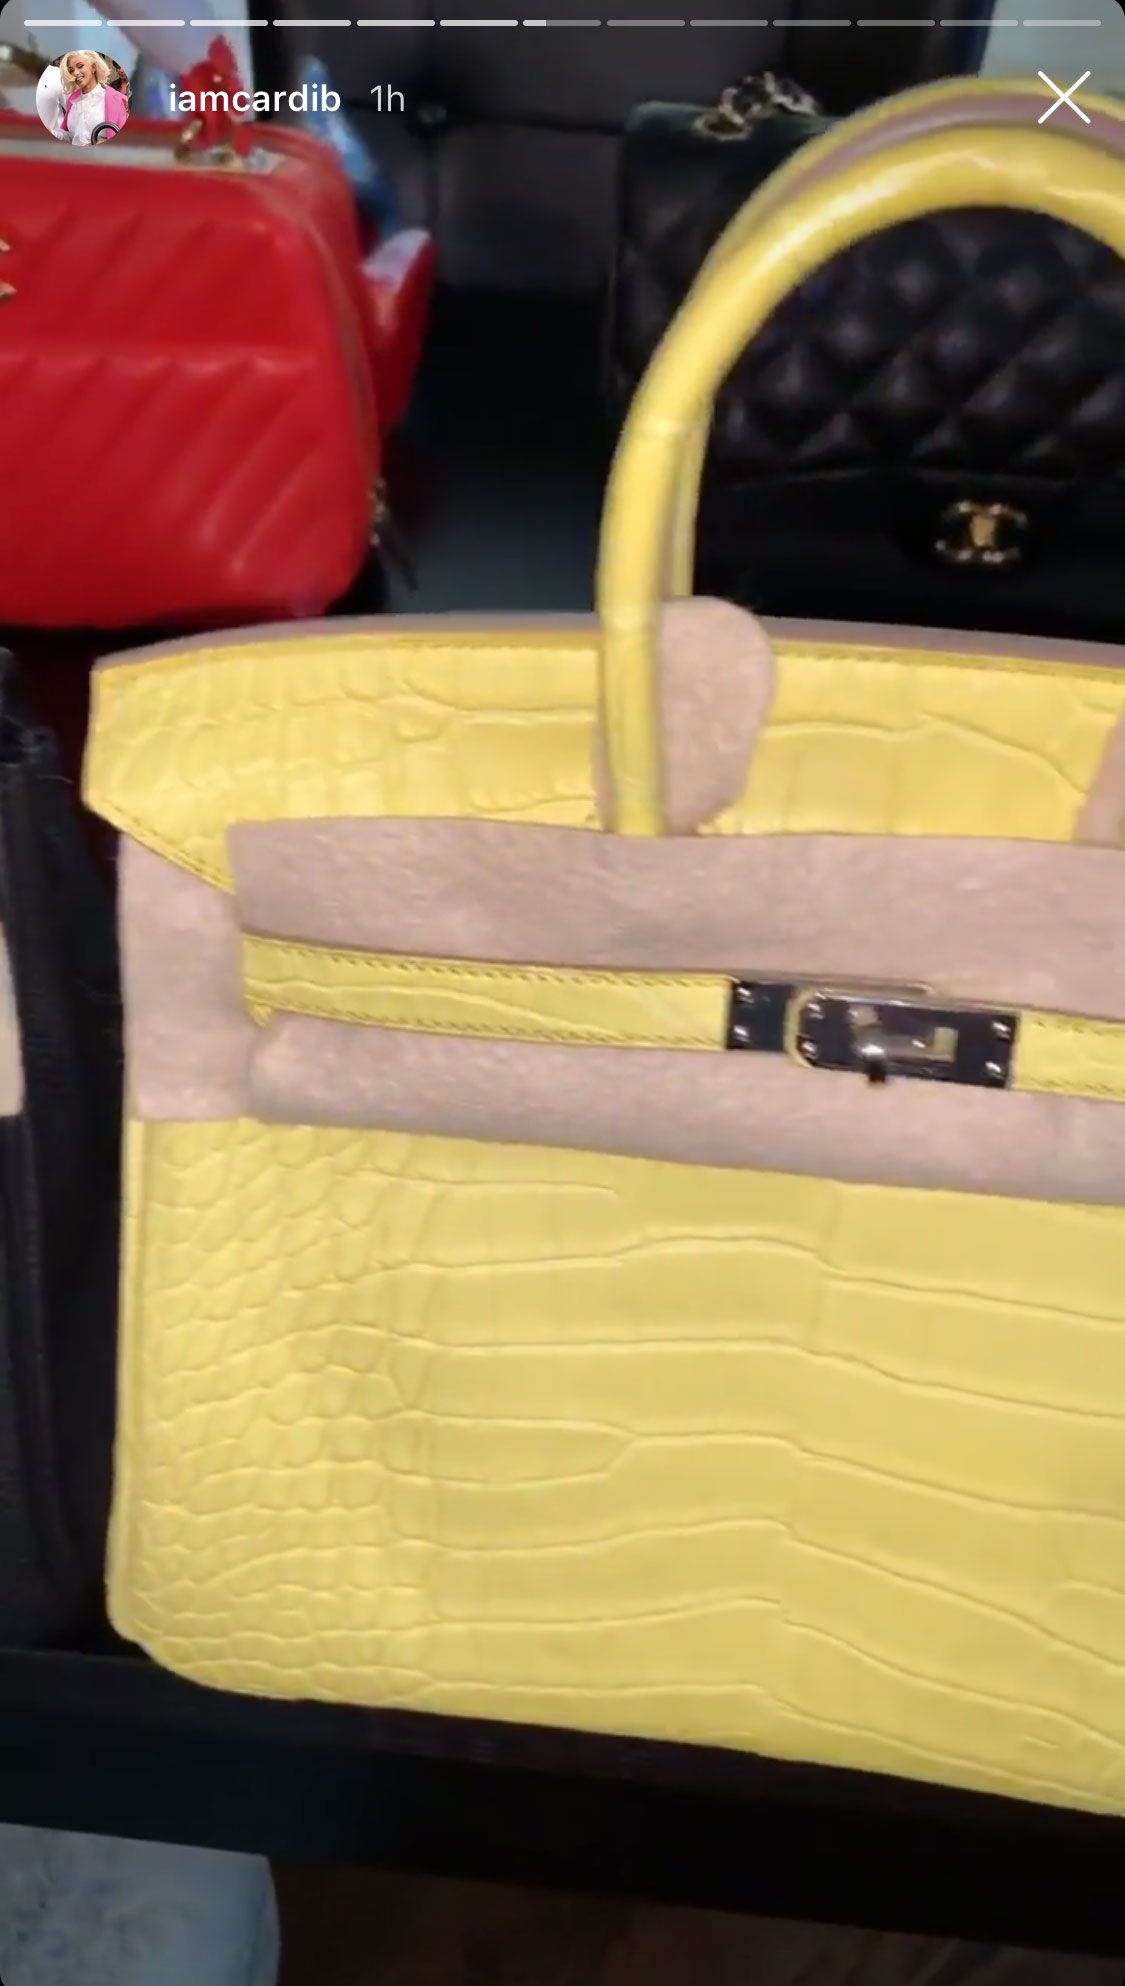 Cardi B & Offset Gift Hermes Bag Worth $25,000 To 5-Year-Old